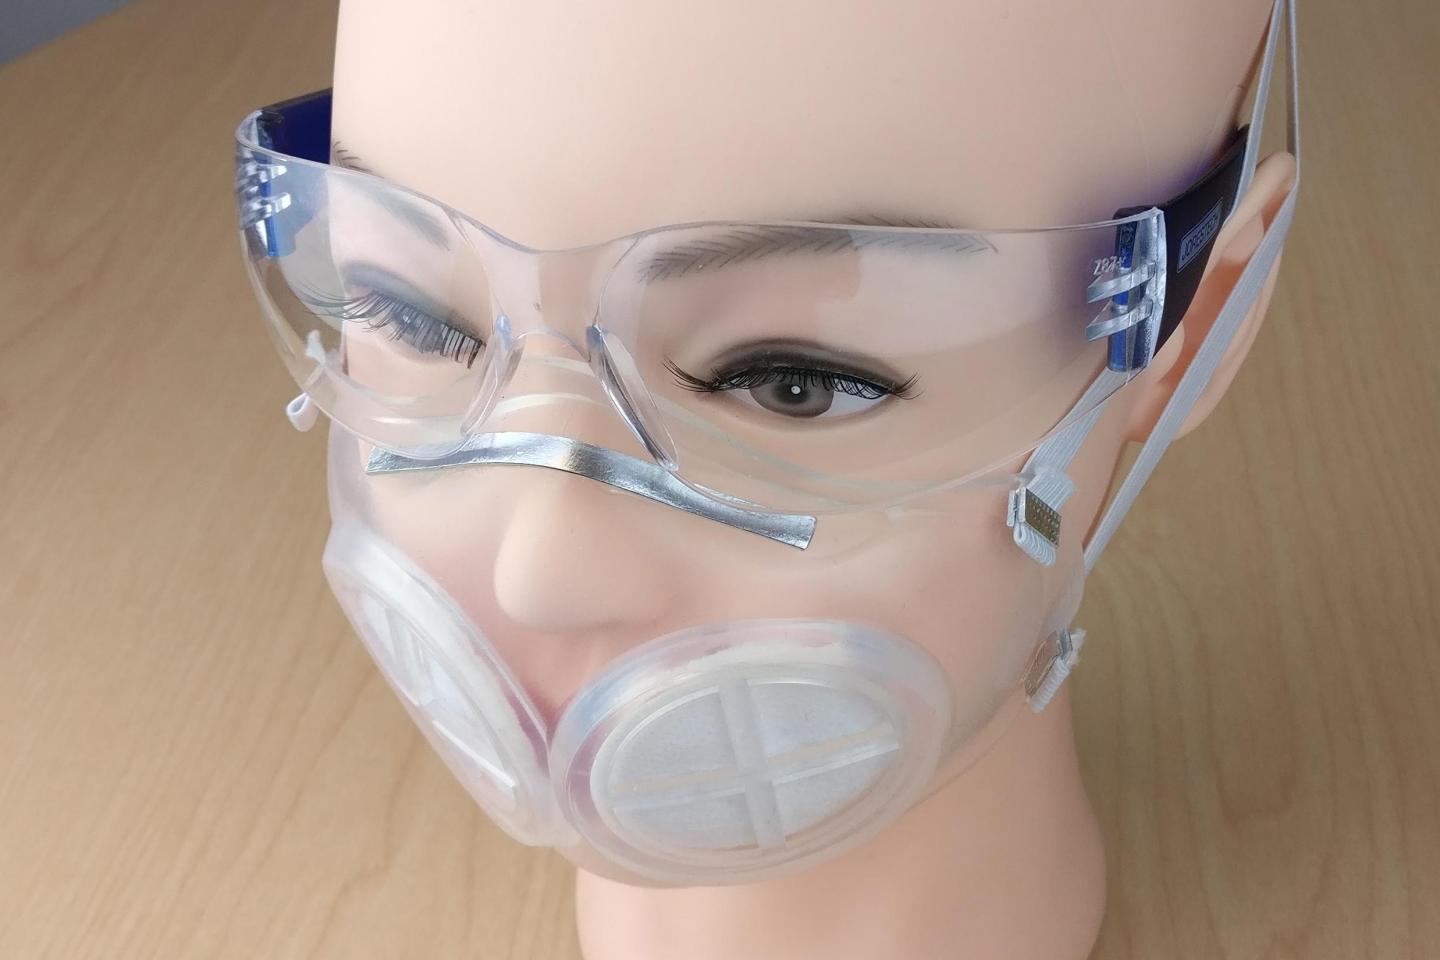 The masks are based on the shape of the 3M 1860 style of N95 masks, the type normally used at Brigham and Women's Hospital. Most of the mask is made of silicone rubber, and there is also space for one or two N95 filters. Source: MIT/Brigham and Women's Hospital